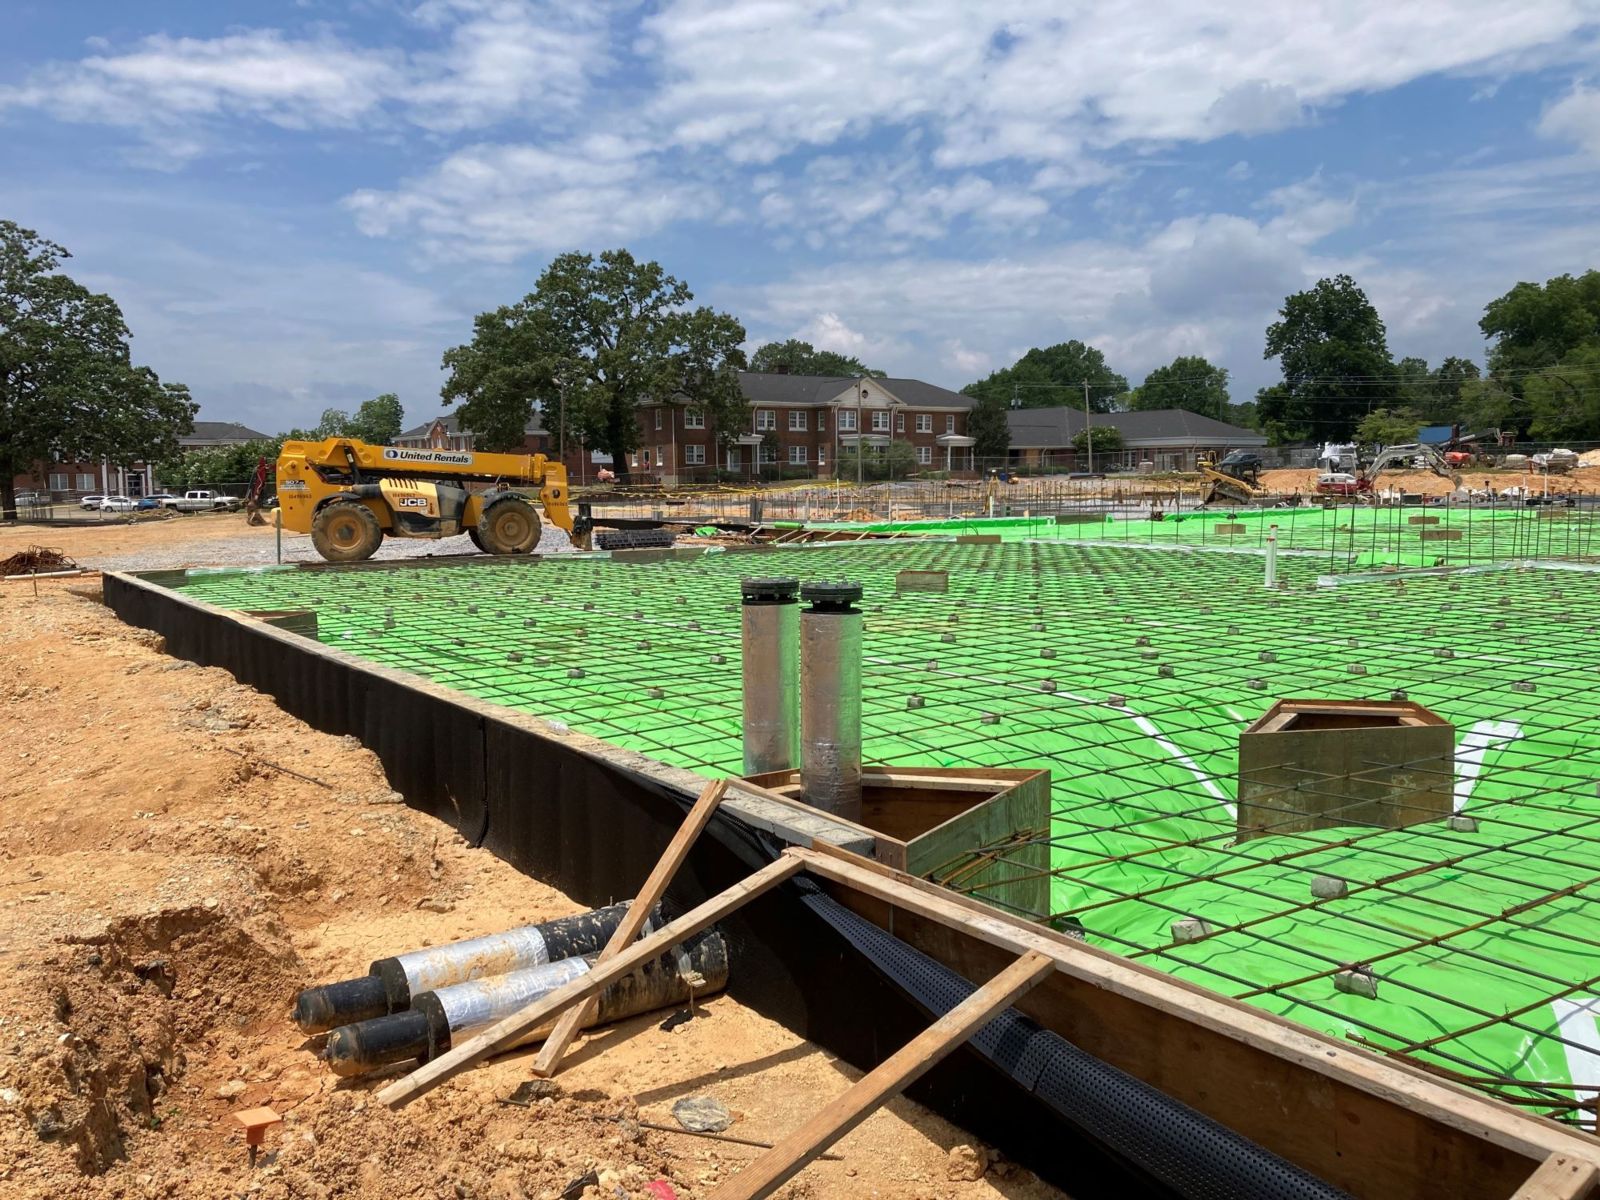 Construction of the Advanced Manufacturing and Workforce Skills Training Center is underway on the East Broad Campus of Gadsden State Community College